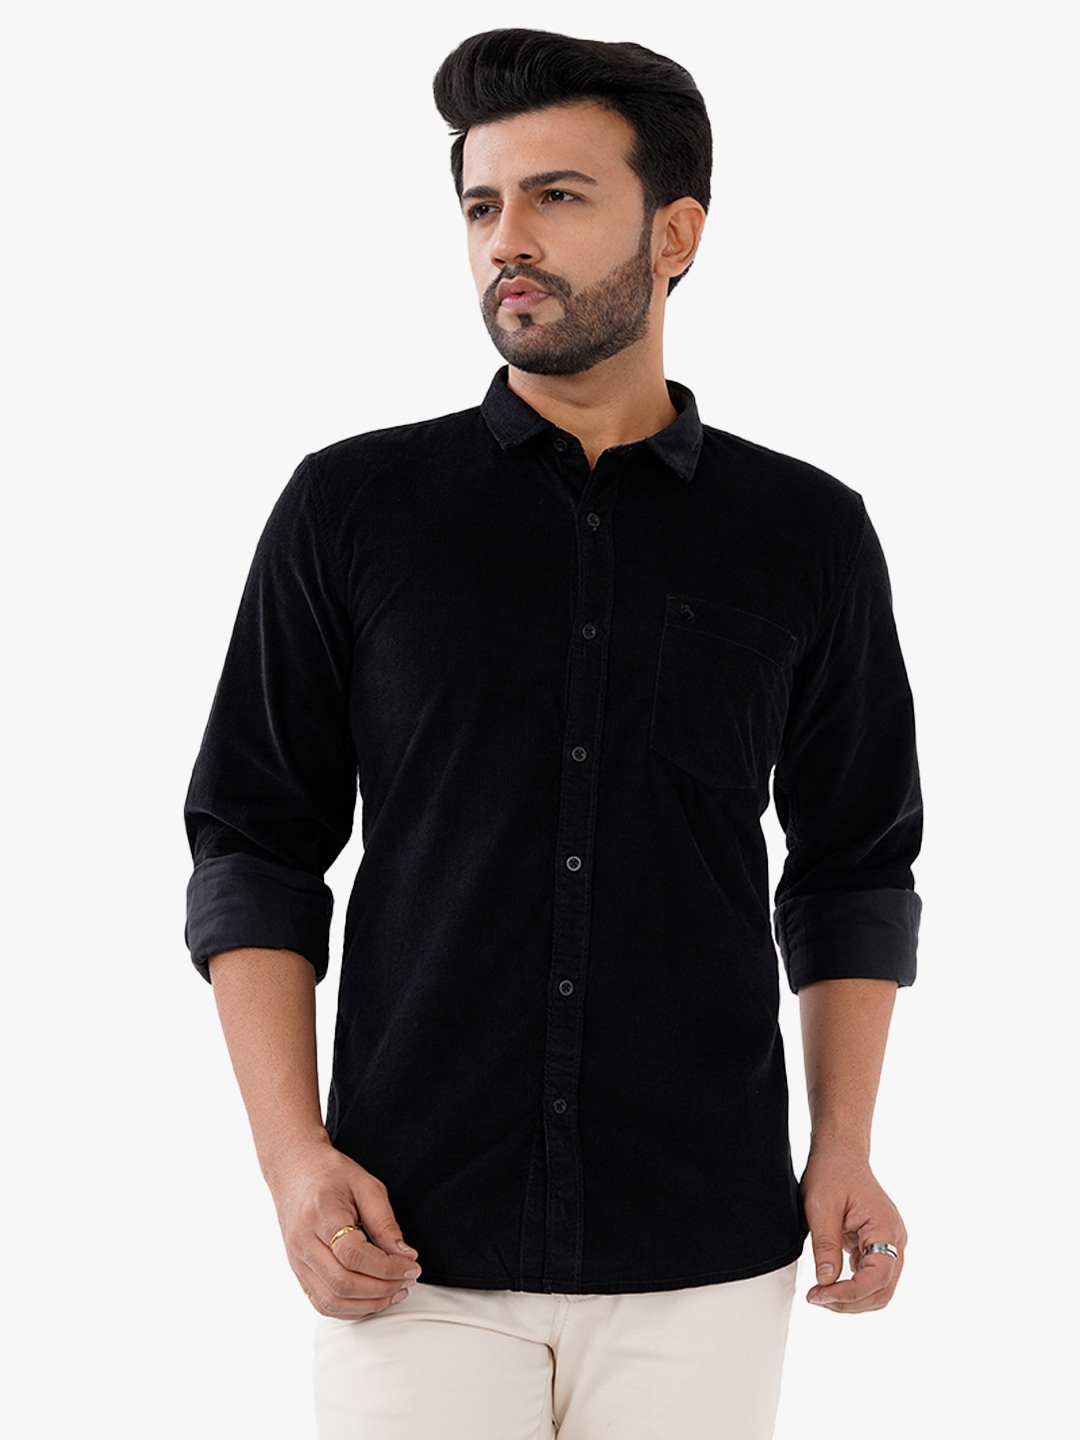 D'cot by Donear | D'cot by Donear Mens Black Cotton Casual Shirts